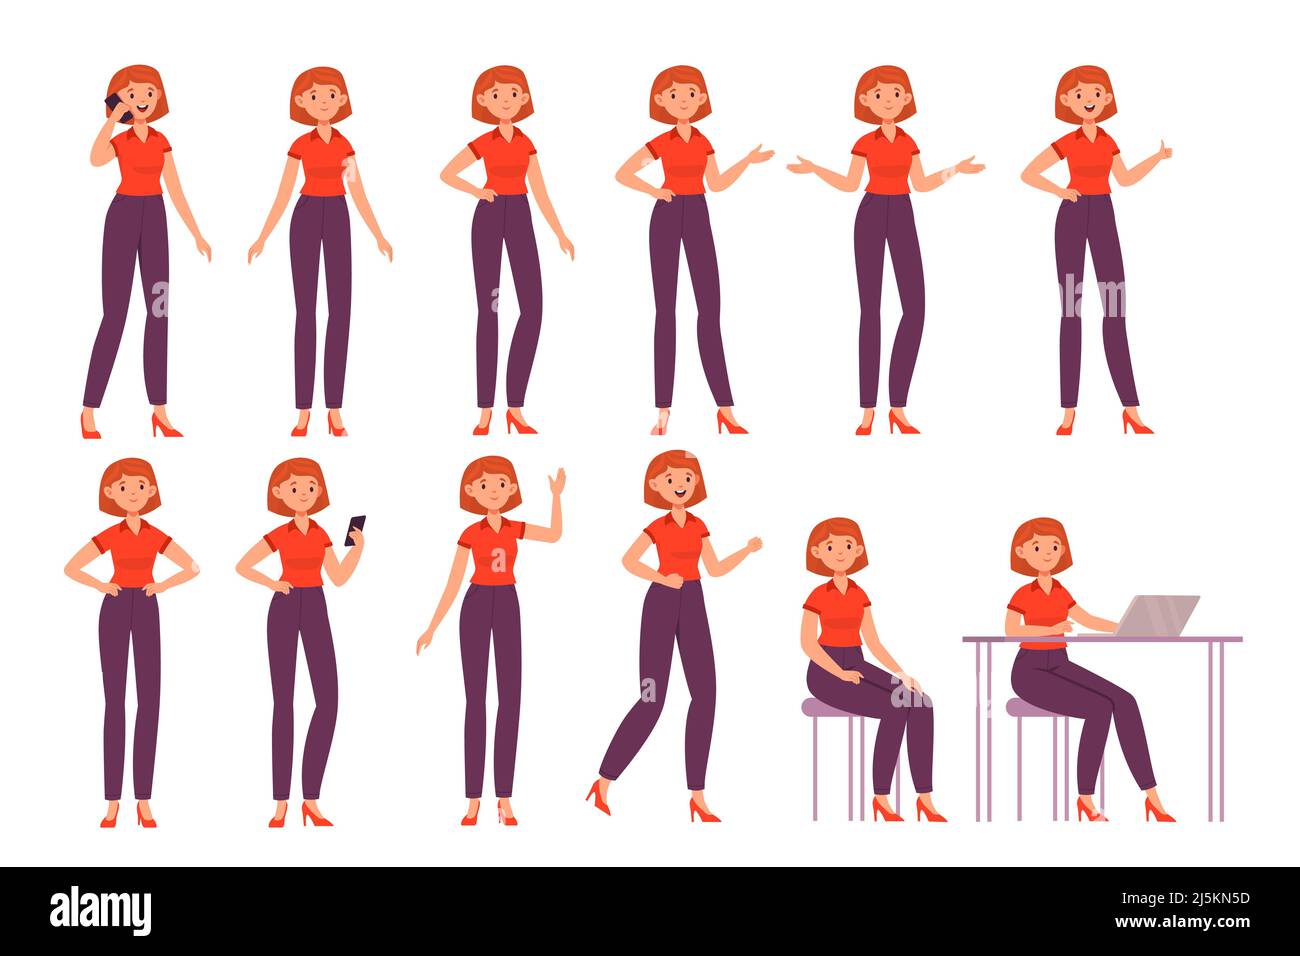 Cute Girl Constructor for Animation, Front View of Female Character in  Various Poses and Hairstyles, Separate Girl Body Stock Vector -  Illustration of avatar, person: 190012426